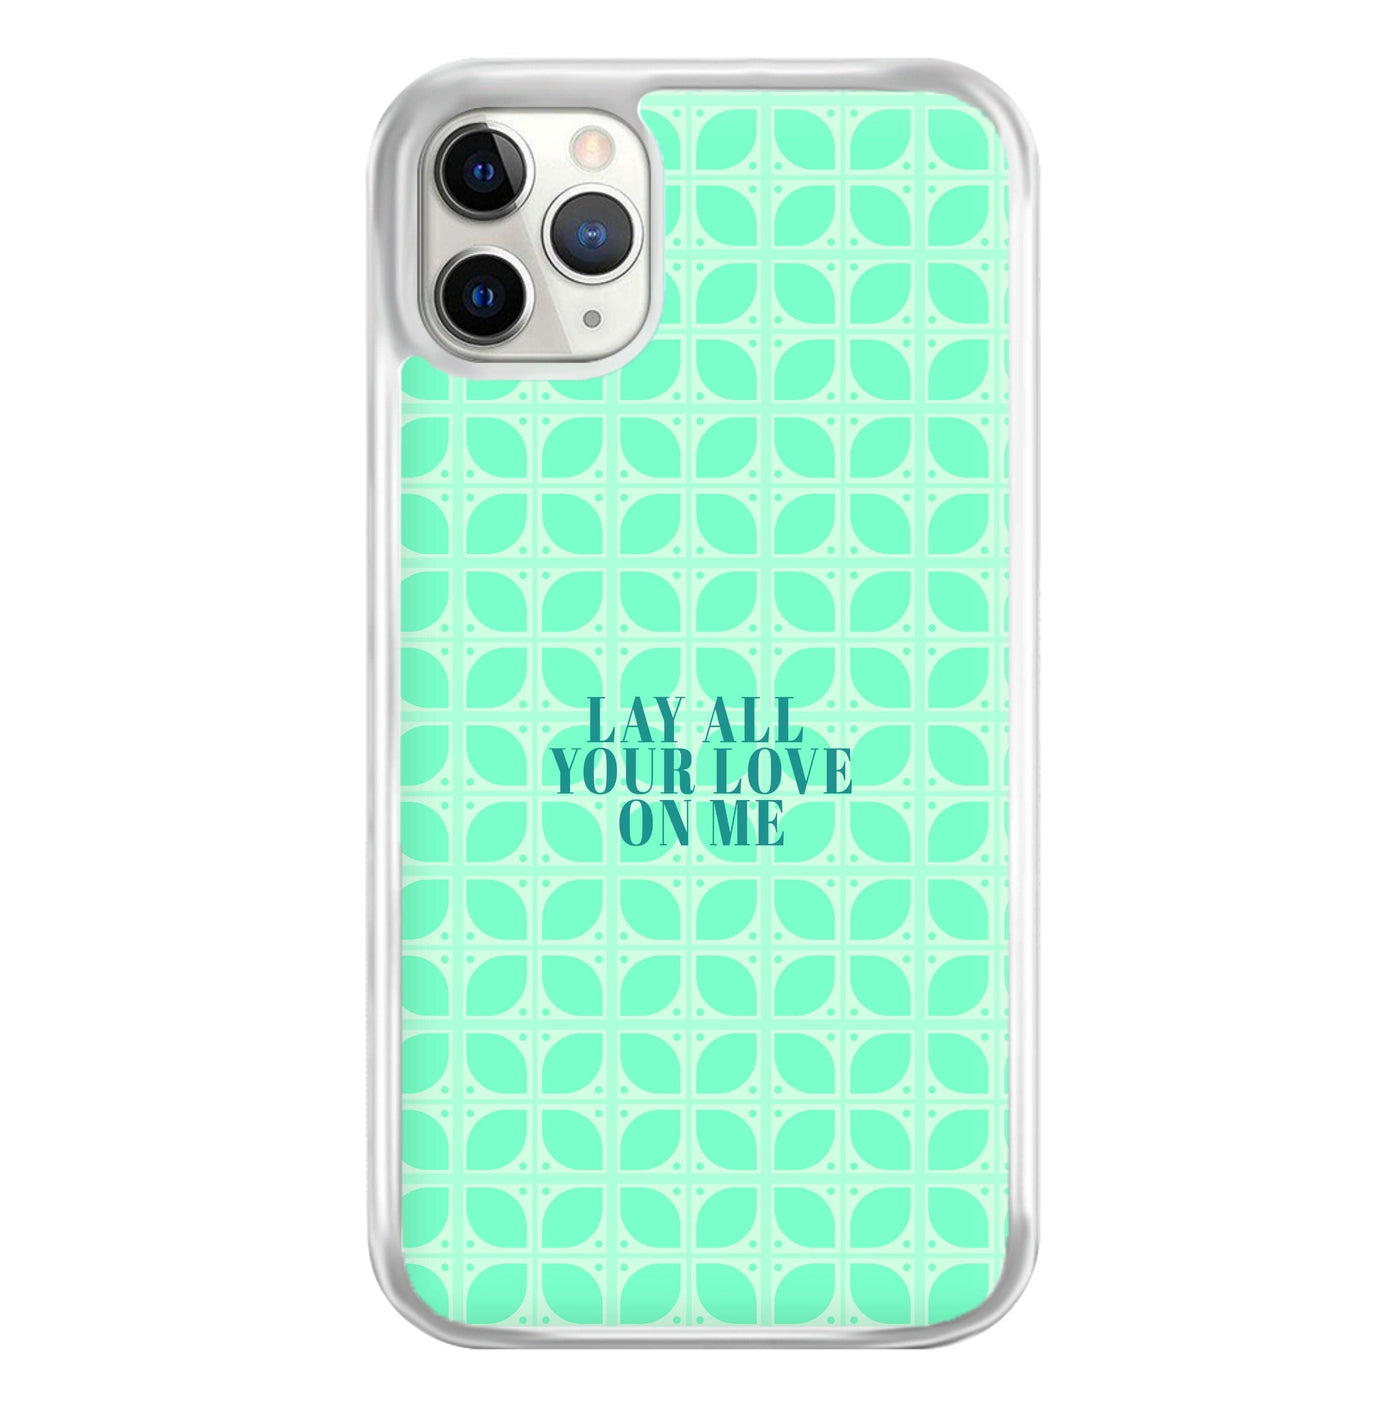 Lay All Your Love On Me - Mamma Mia Phone Case